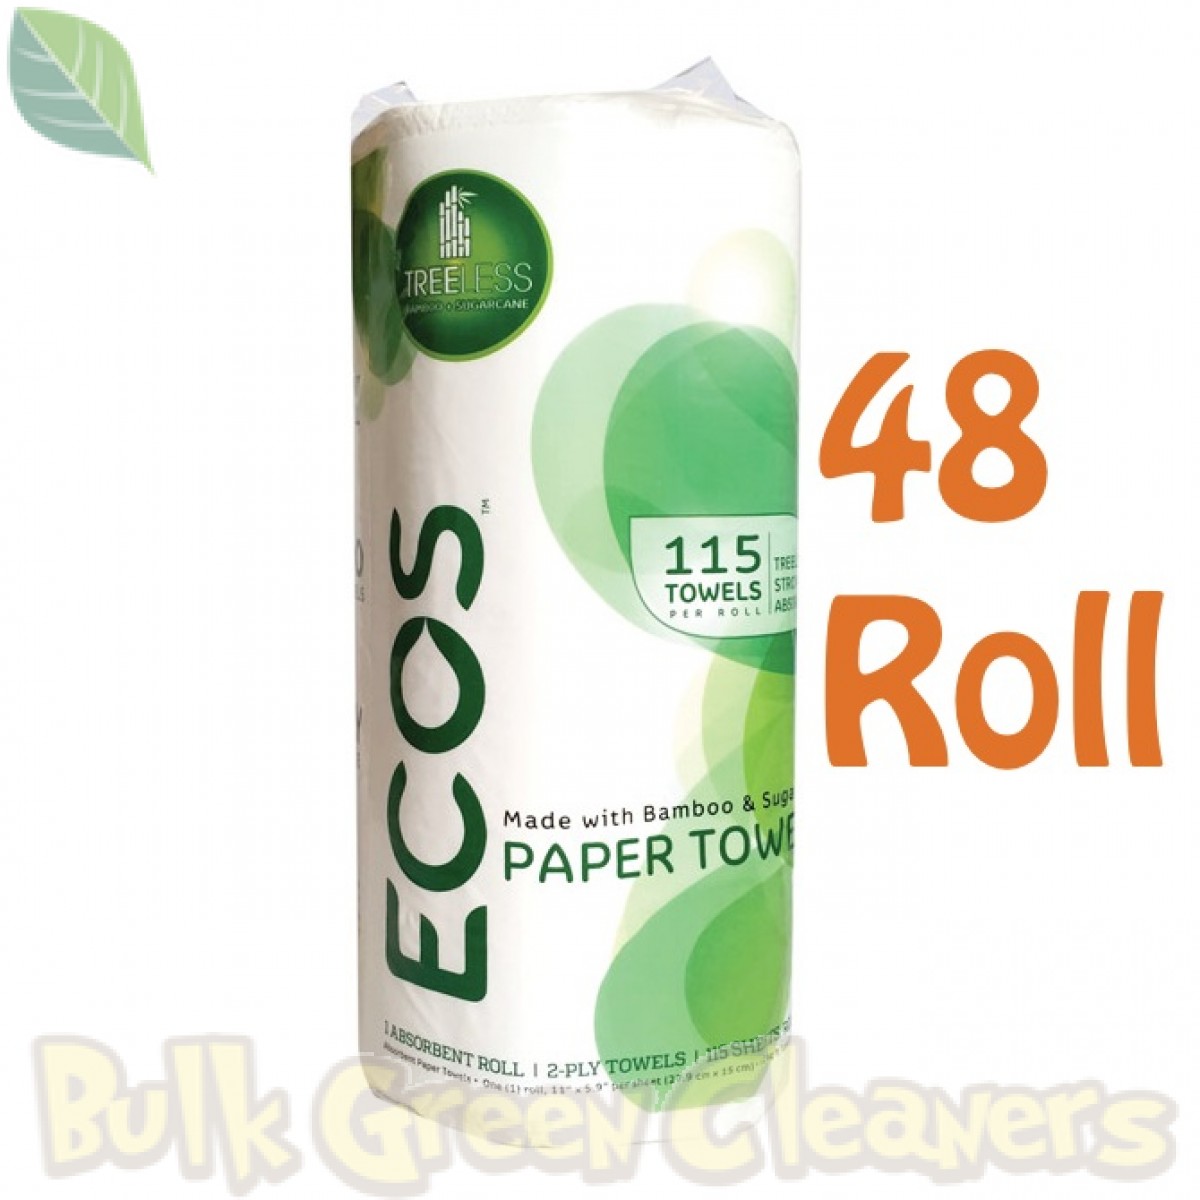 ECOS Tree-Free Paper Towels by Earth Friendly Products, 48 Roll Case Pack, PL9954/08